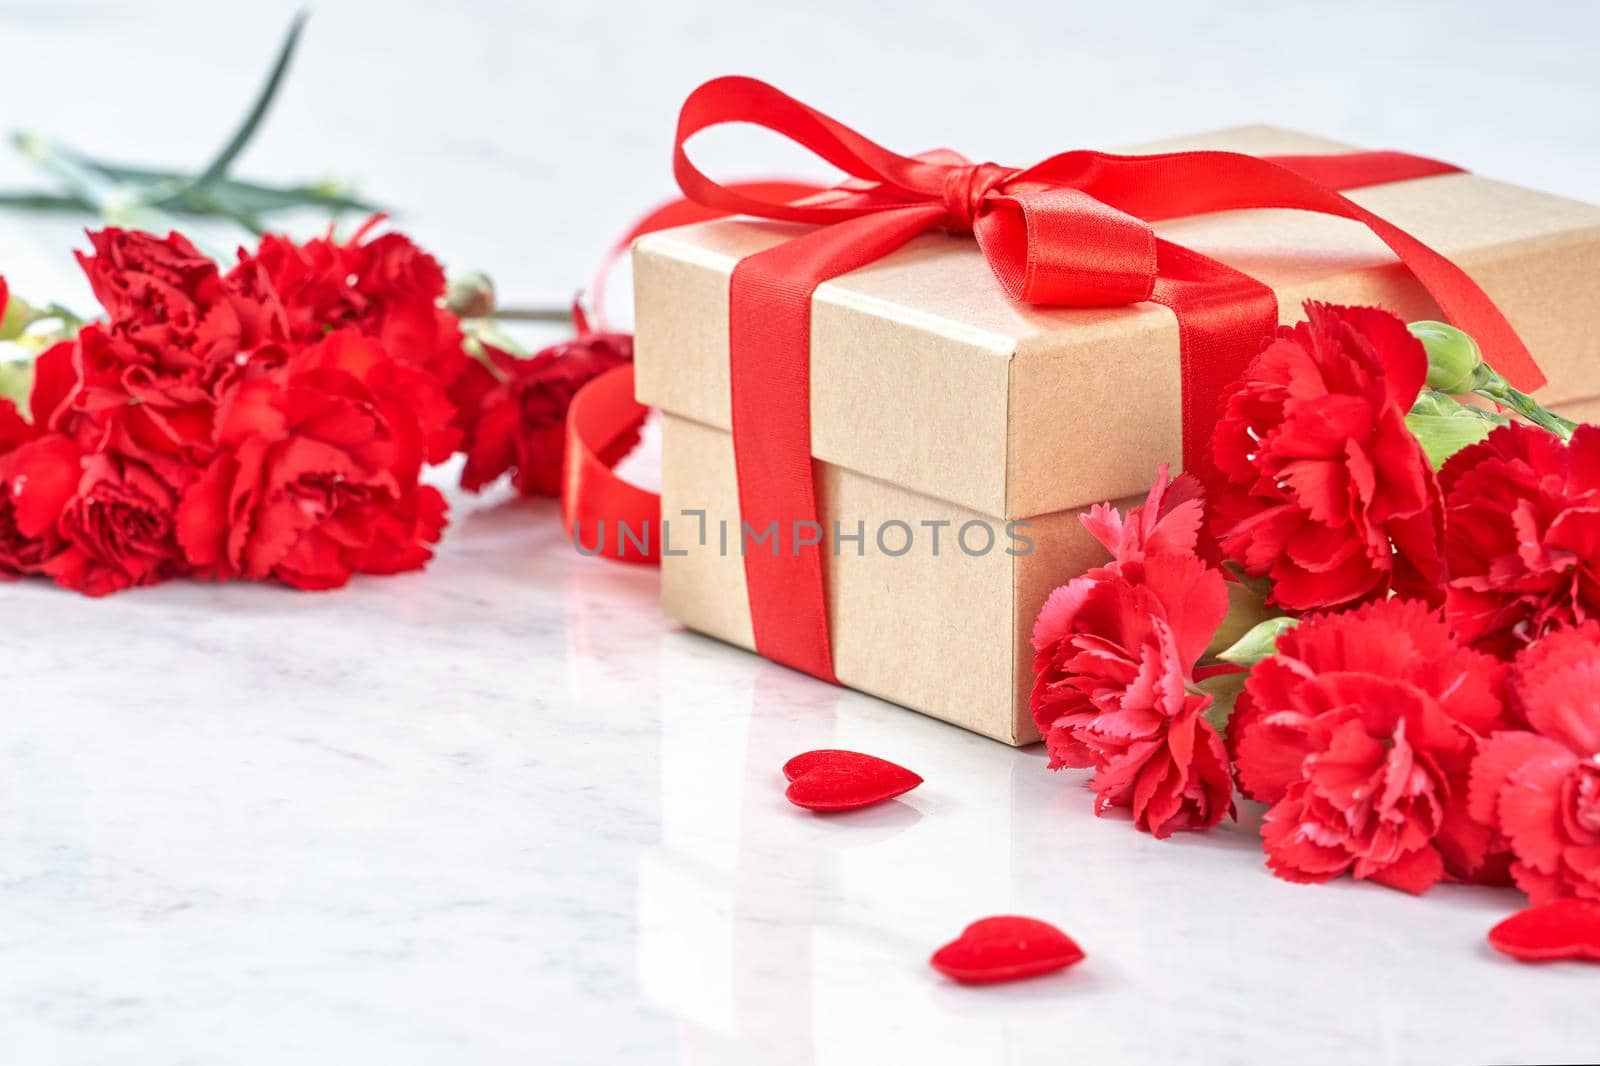 Mother's Day greeting design concept - Beautiful blooming red carnations, gift box with ribbon on white marble table background, close up, copy space. by ROMIXIMAGE